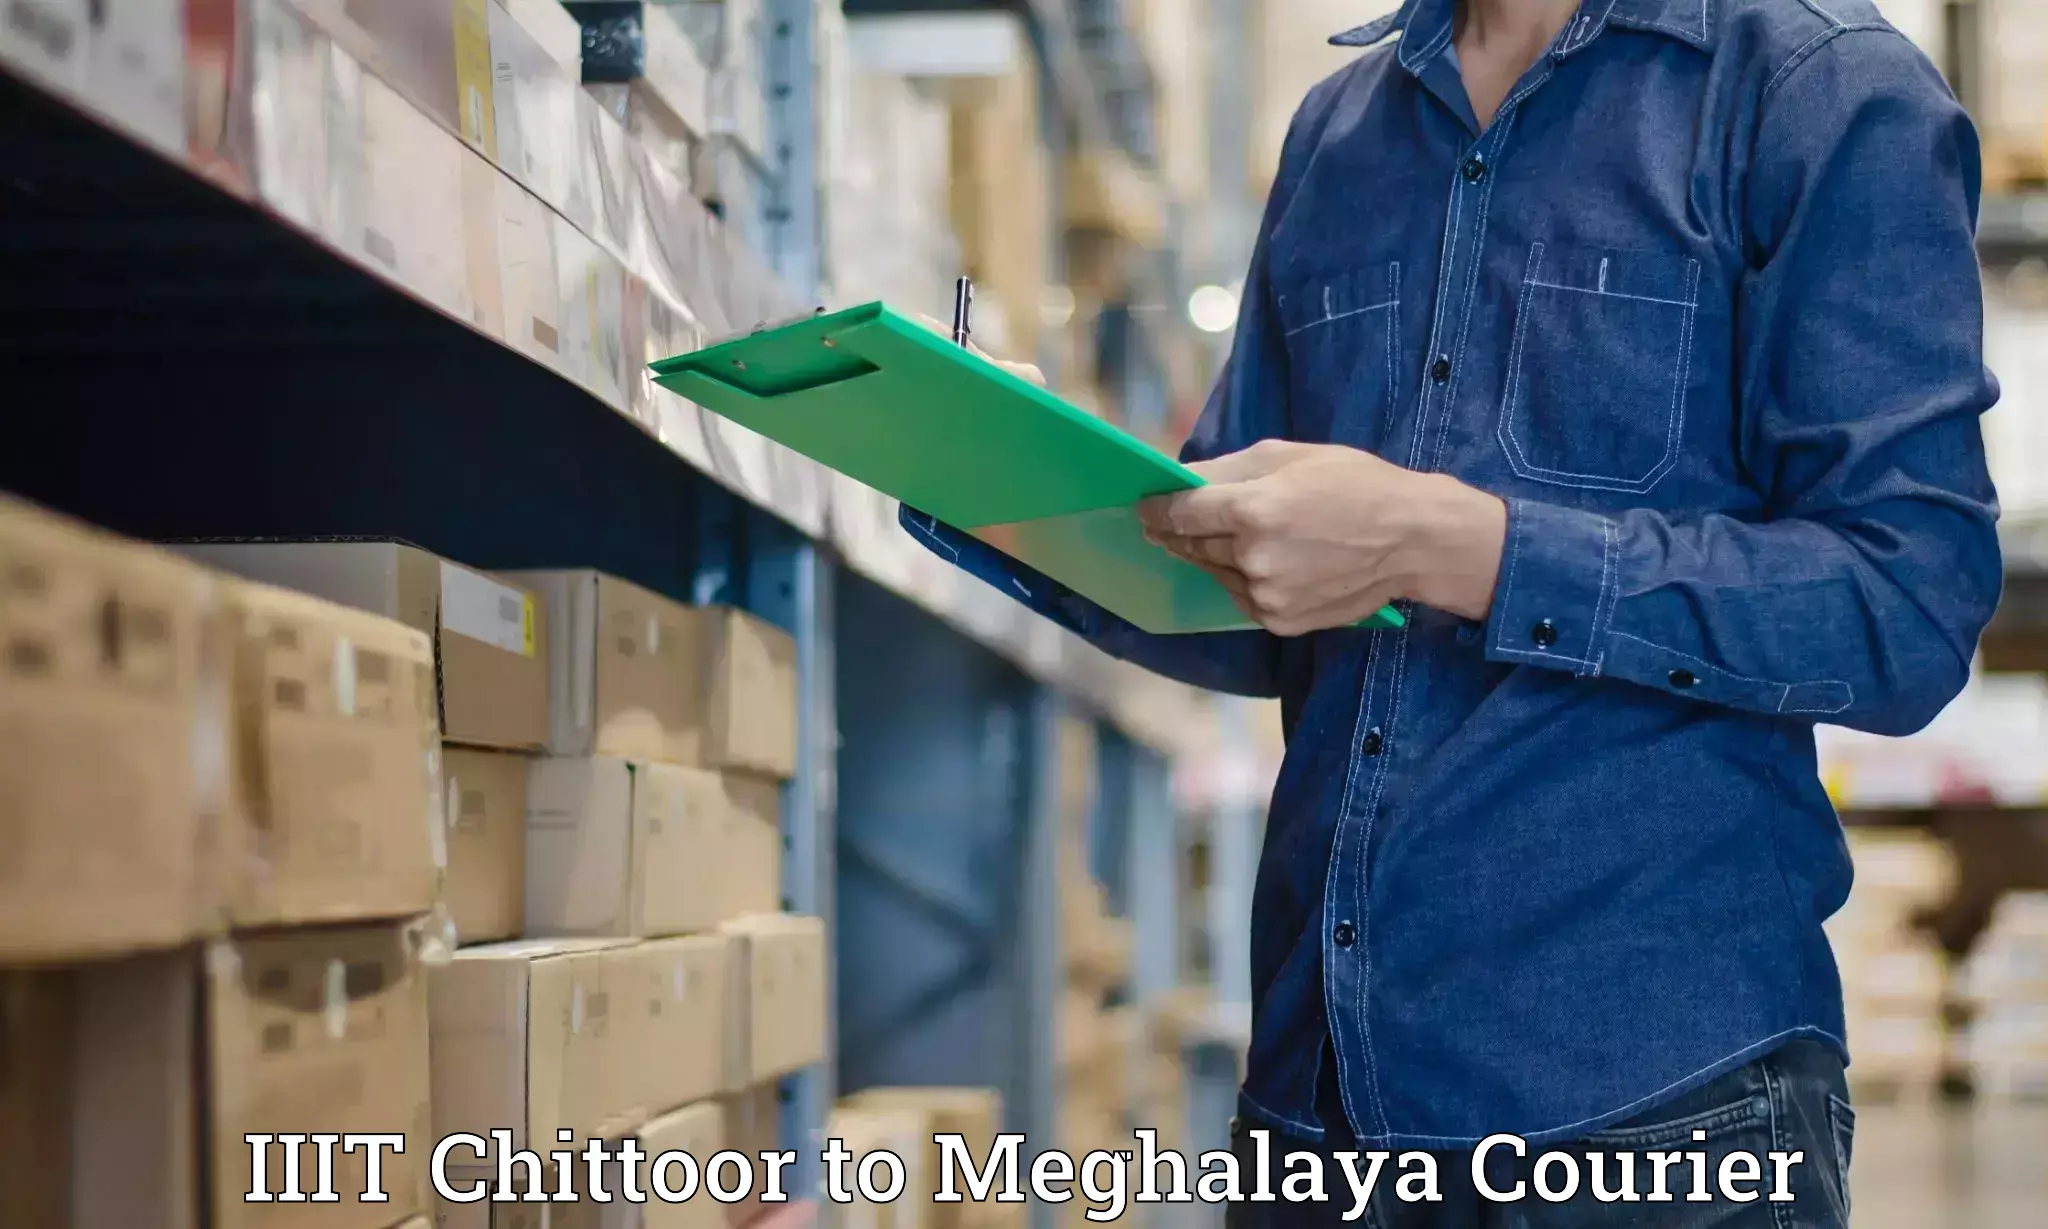 Global courier networks IIIT Chittoor to Nongpoh